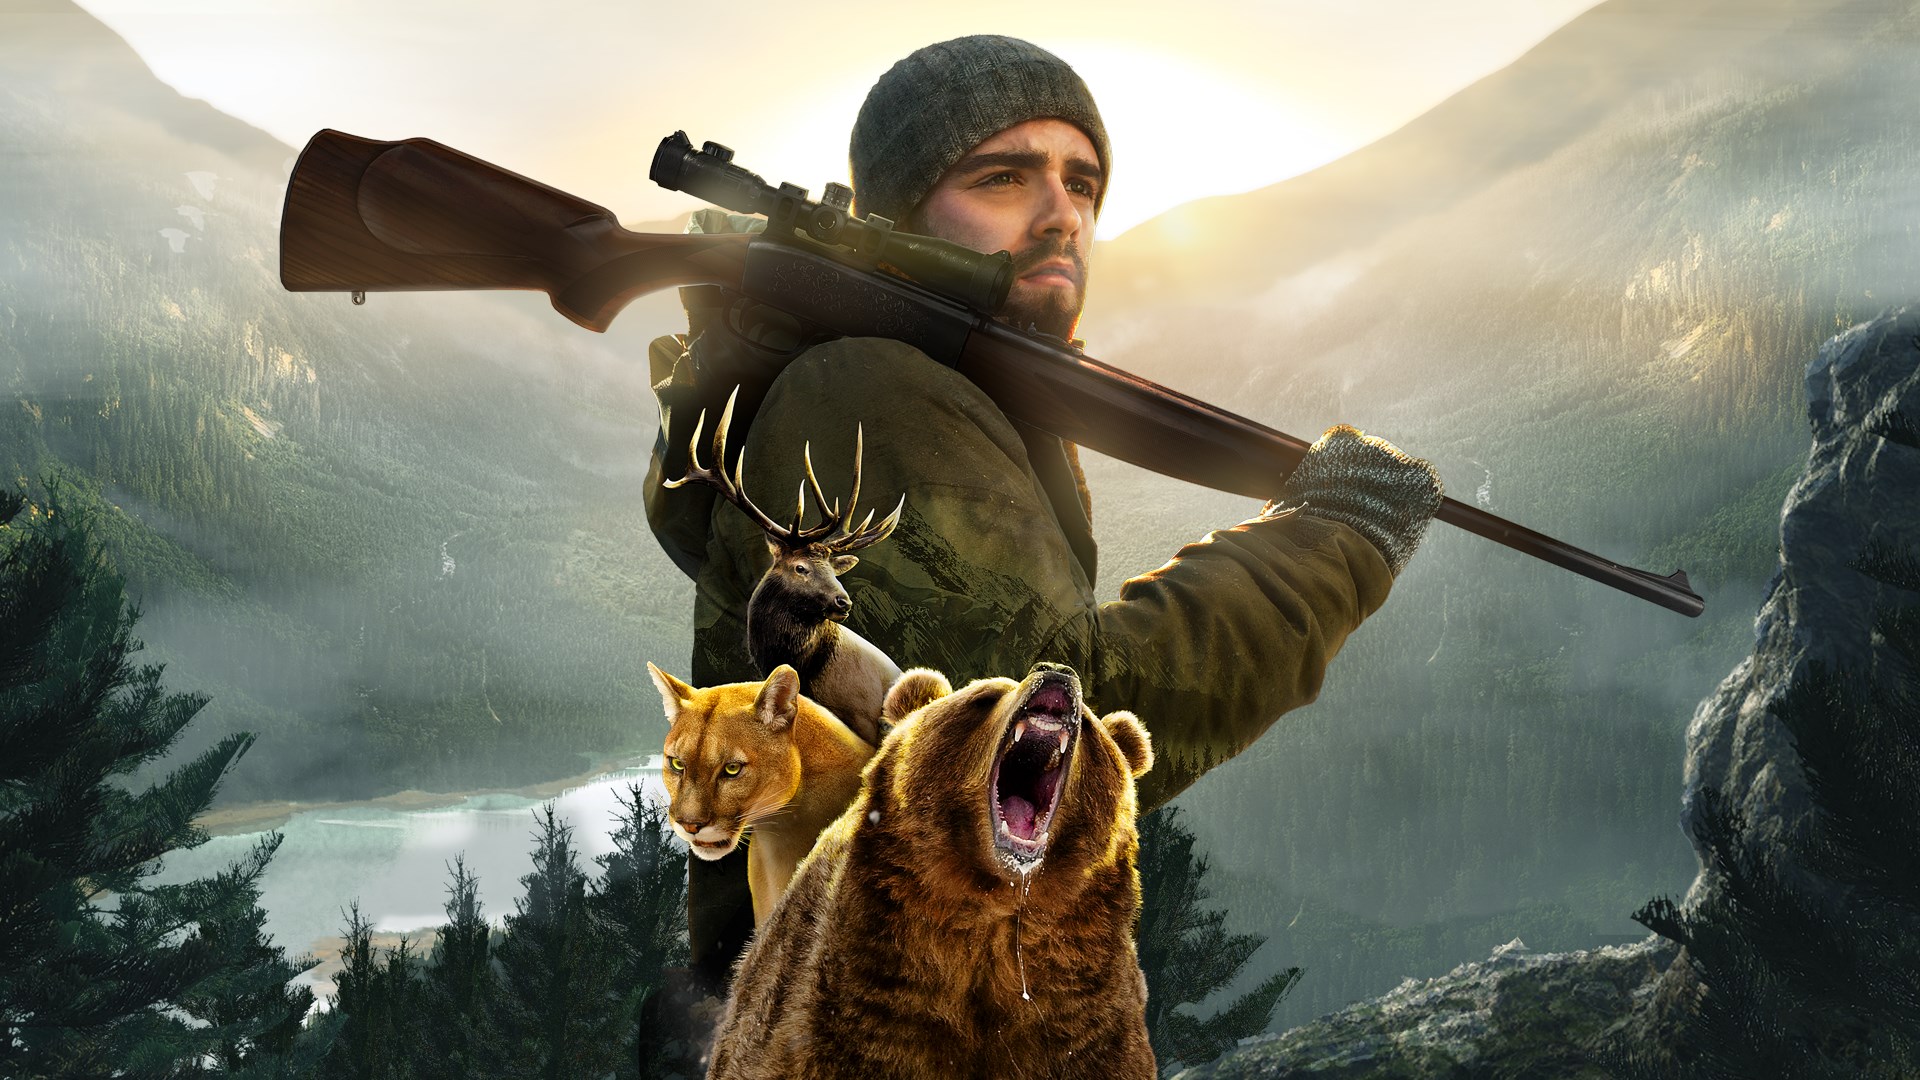 The Best Video Games for Hunters